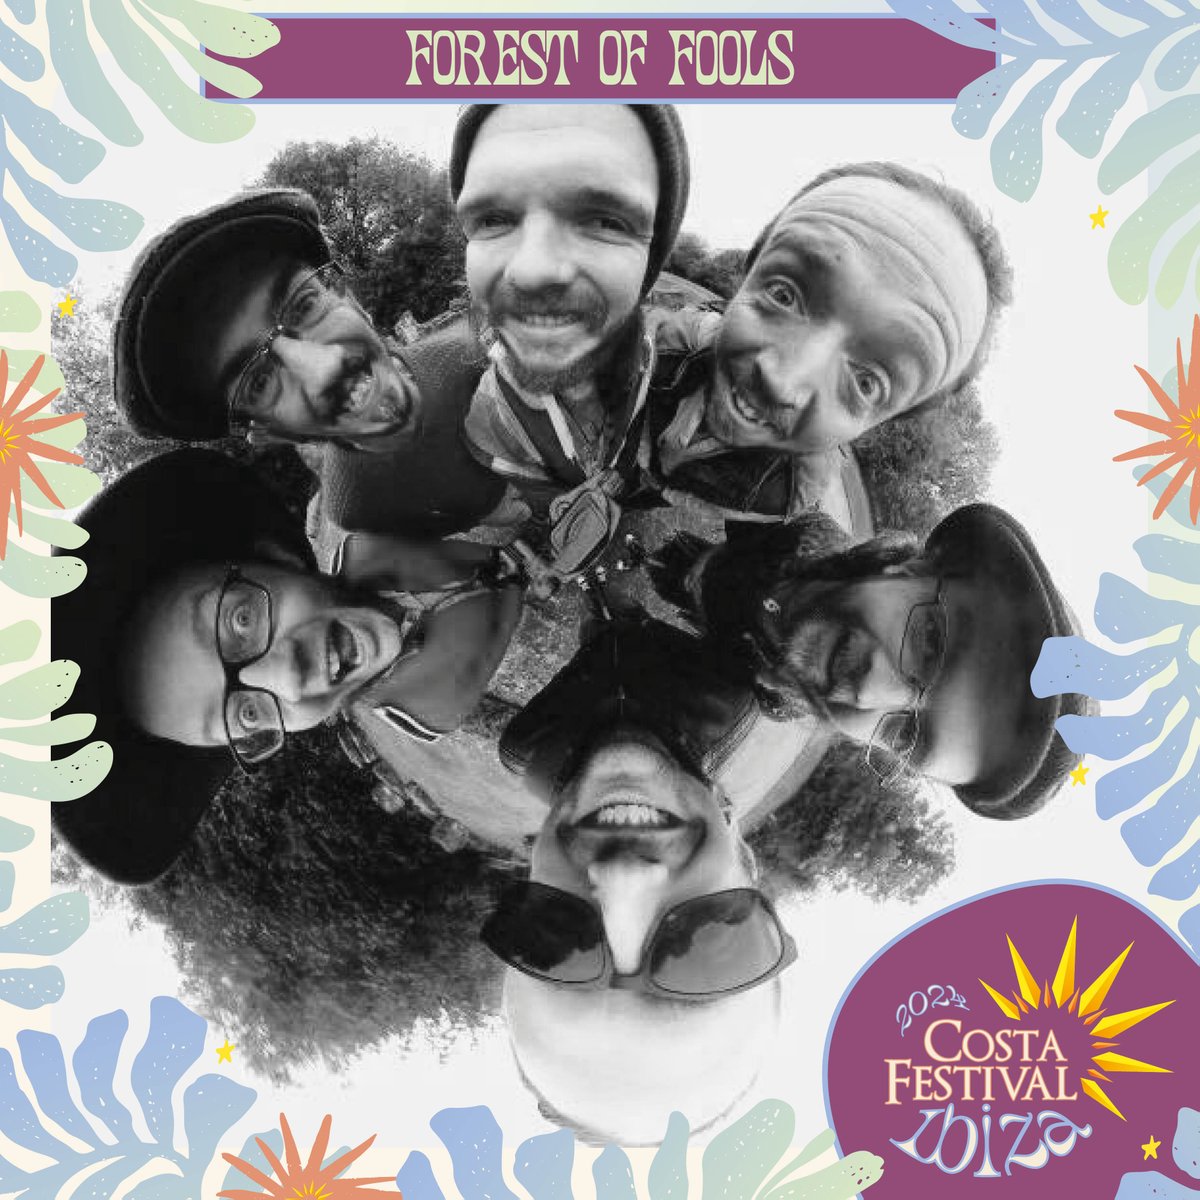 Do you love traditional folk instruments playing the unconventional? Then you should pre order forest of fools' latest album! Find out more about their latest releases & psyche yourself up for Costa Ibiza by following the link: forestoffools.com 🔗costafestival.co.uk/costa-festival…